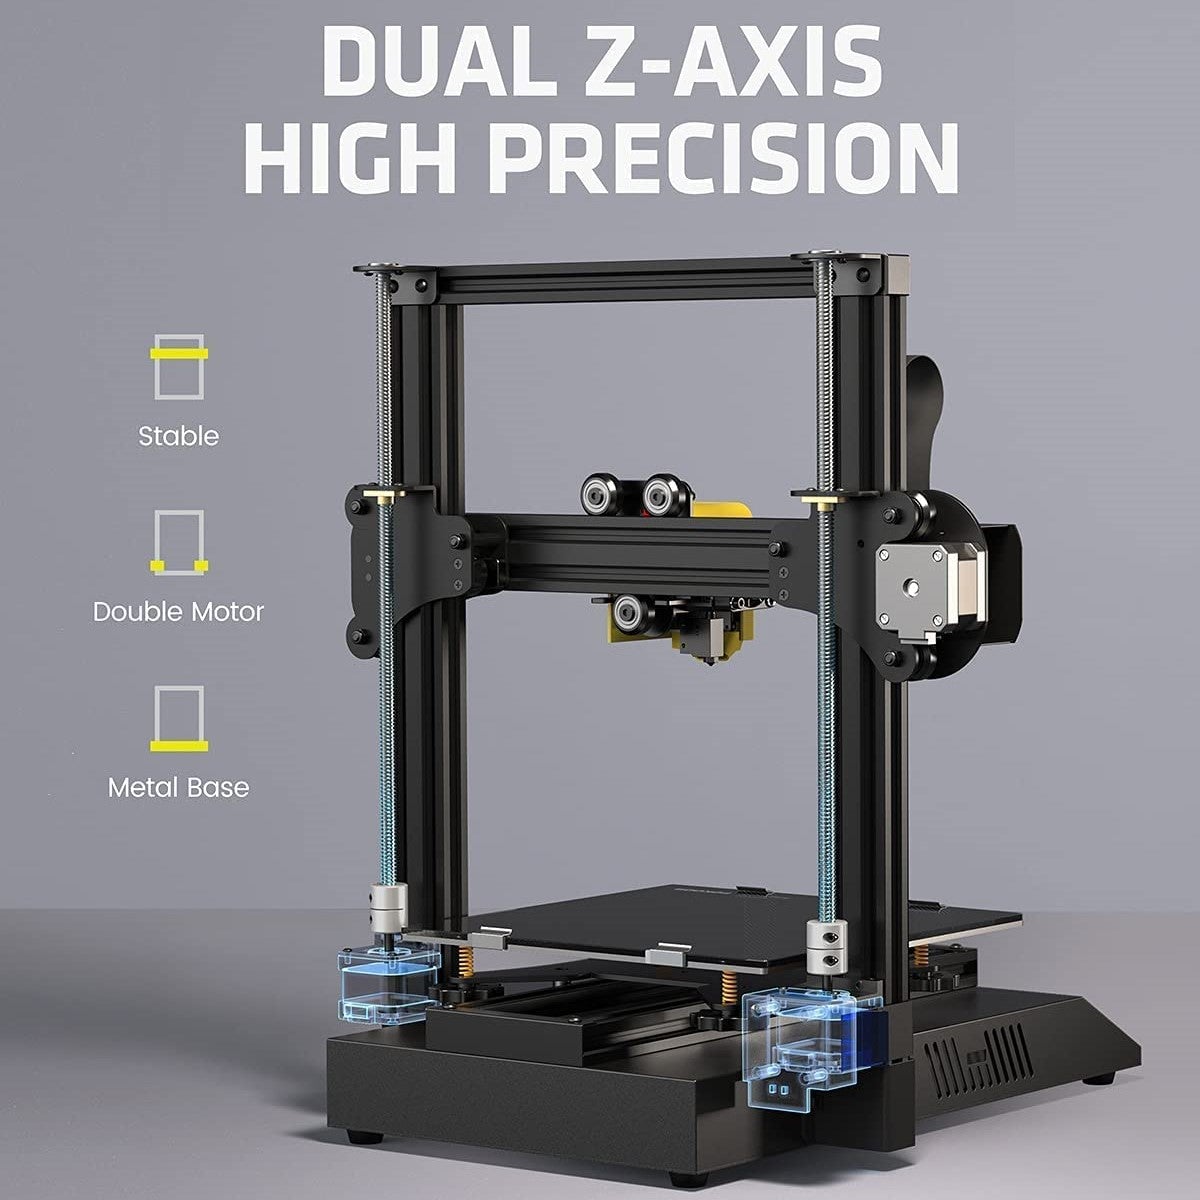 Fokoos Odin-5 F3 Foldable 3D Printer (235*235*250mm Print Volume) Dual Z-Axis, Integrated Direct Drive Extruder, Glass Bed